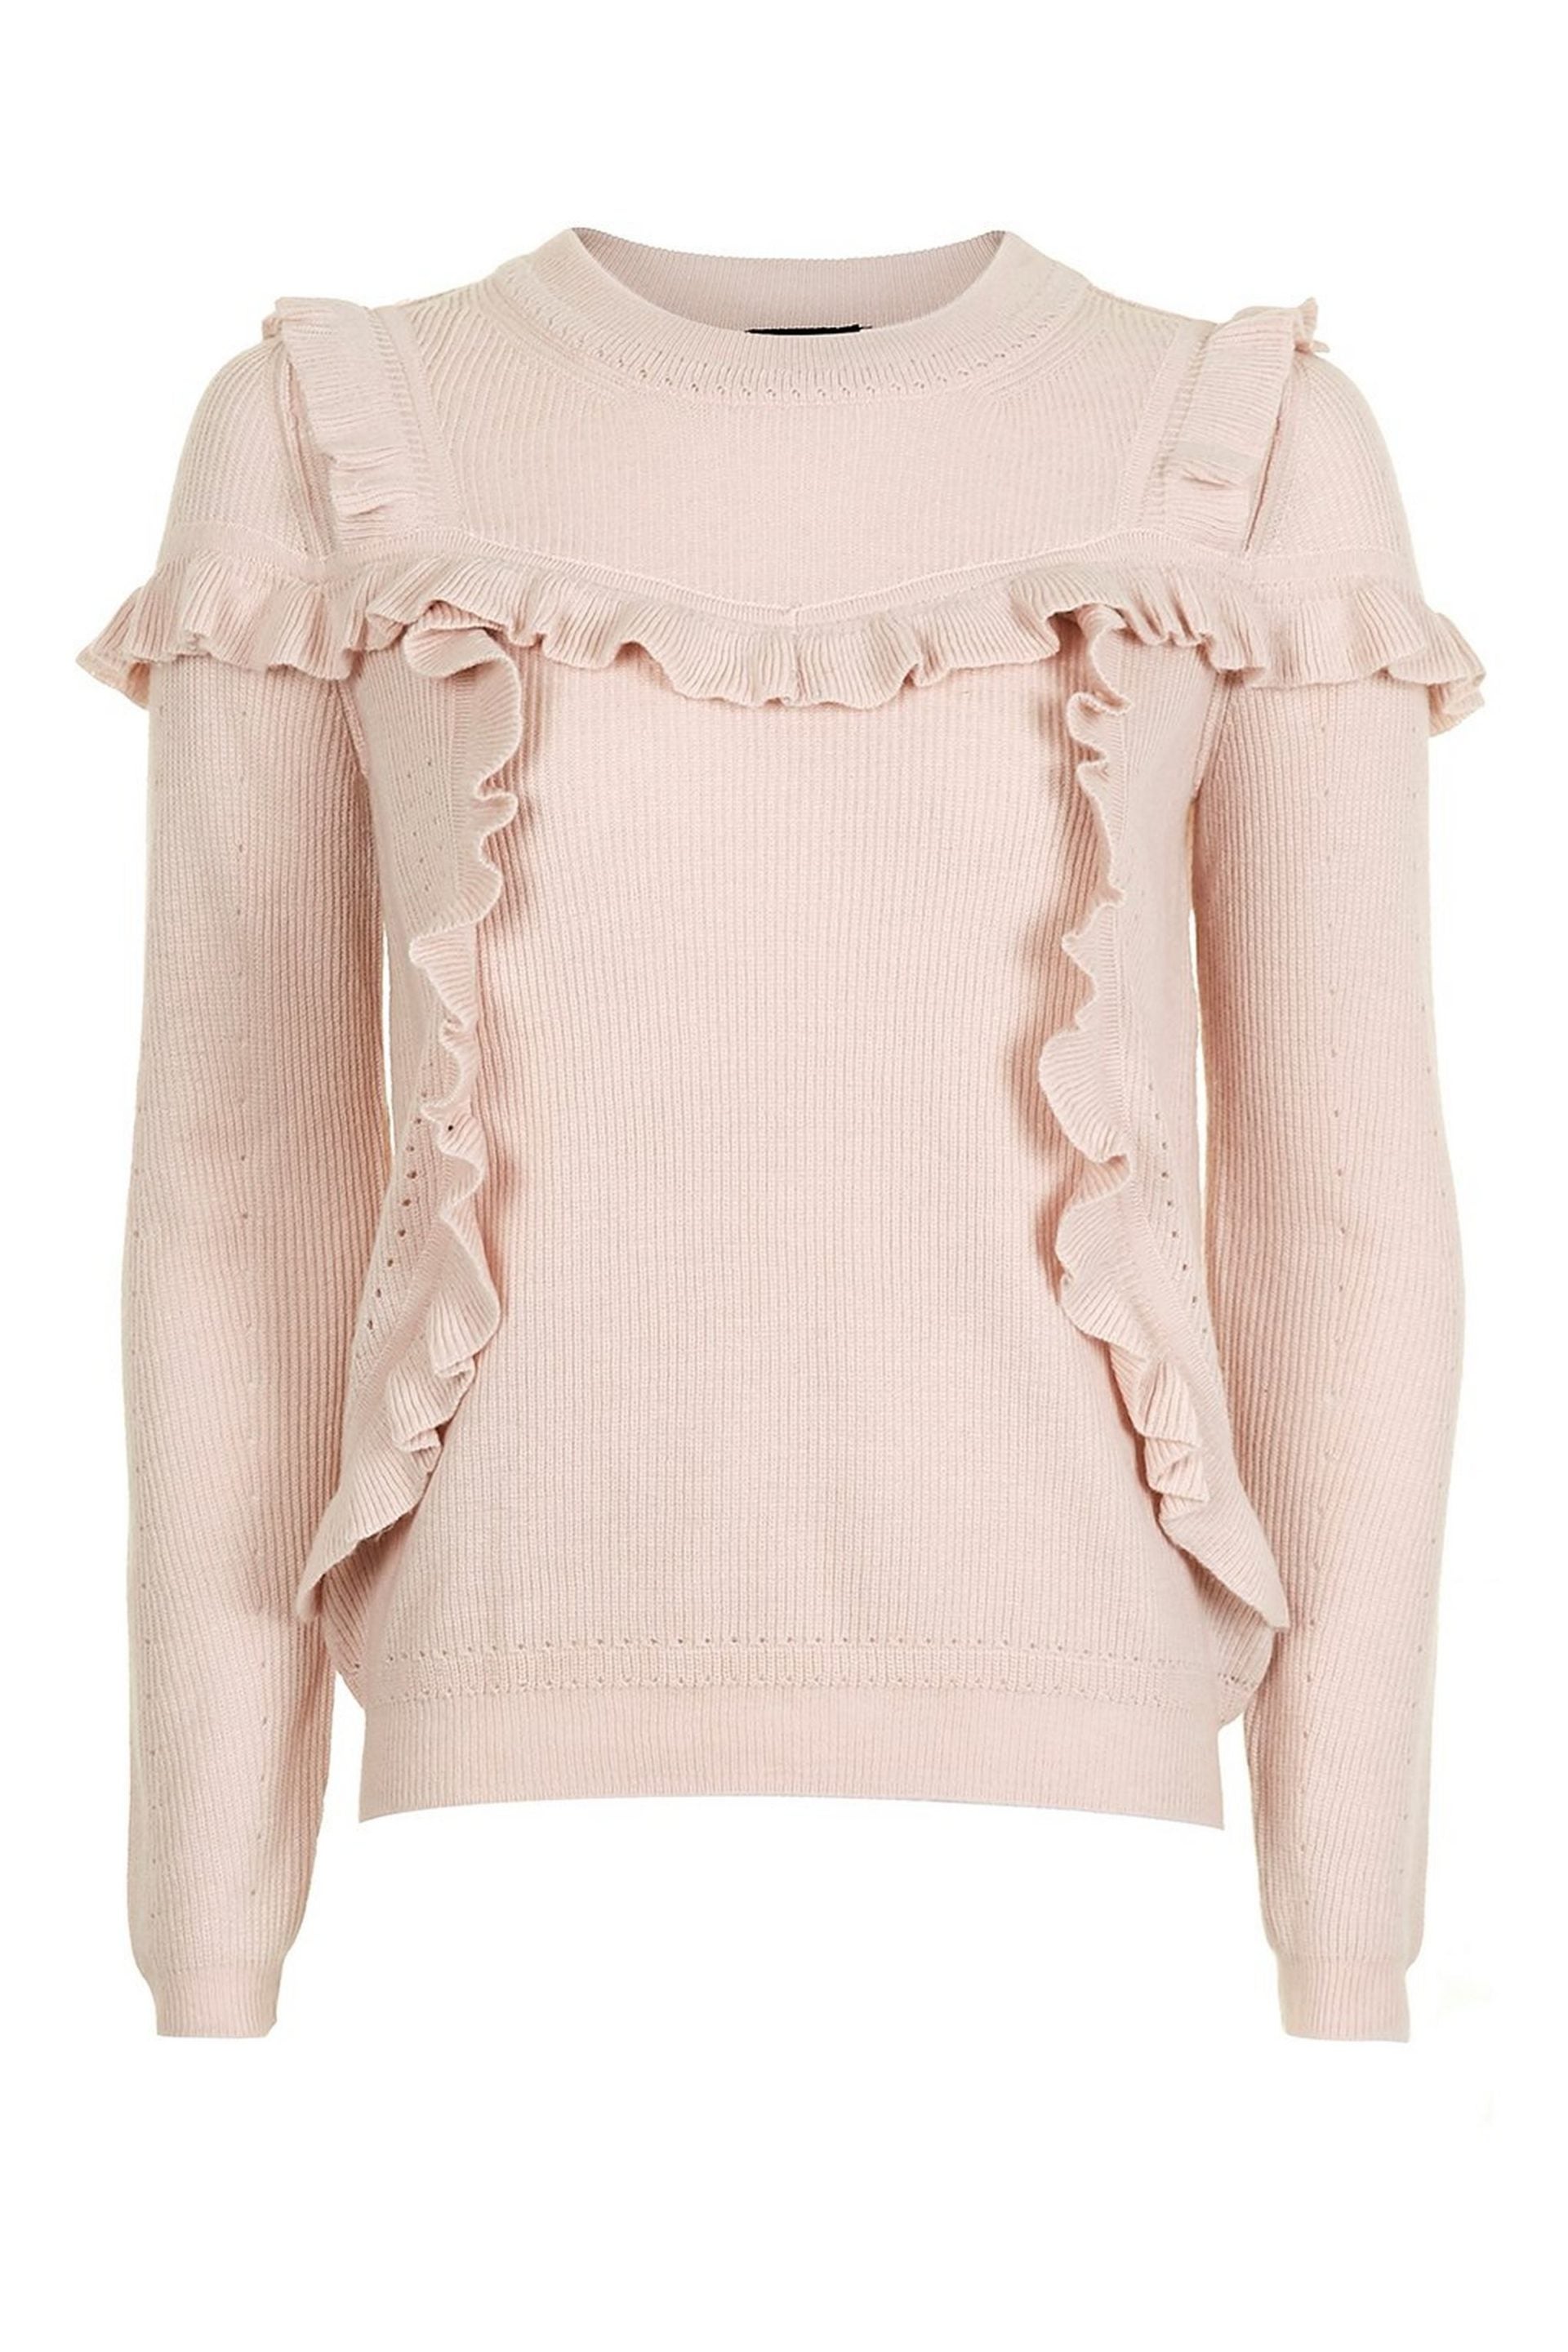 It’s Sweater Weather And Ruffled Knits Are In! Shop These Finds For ...